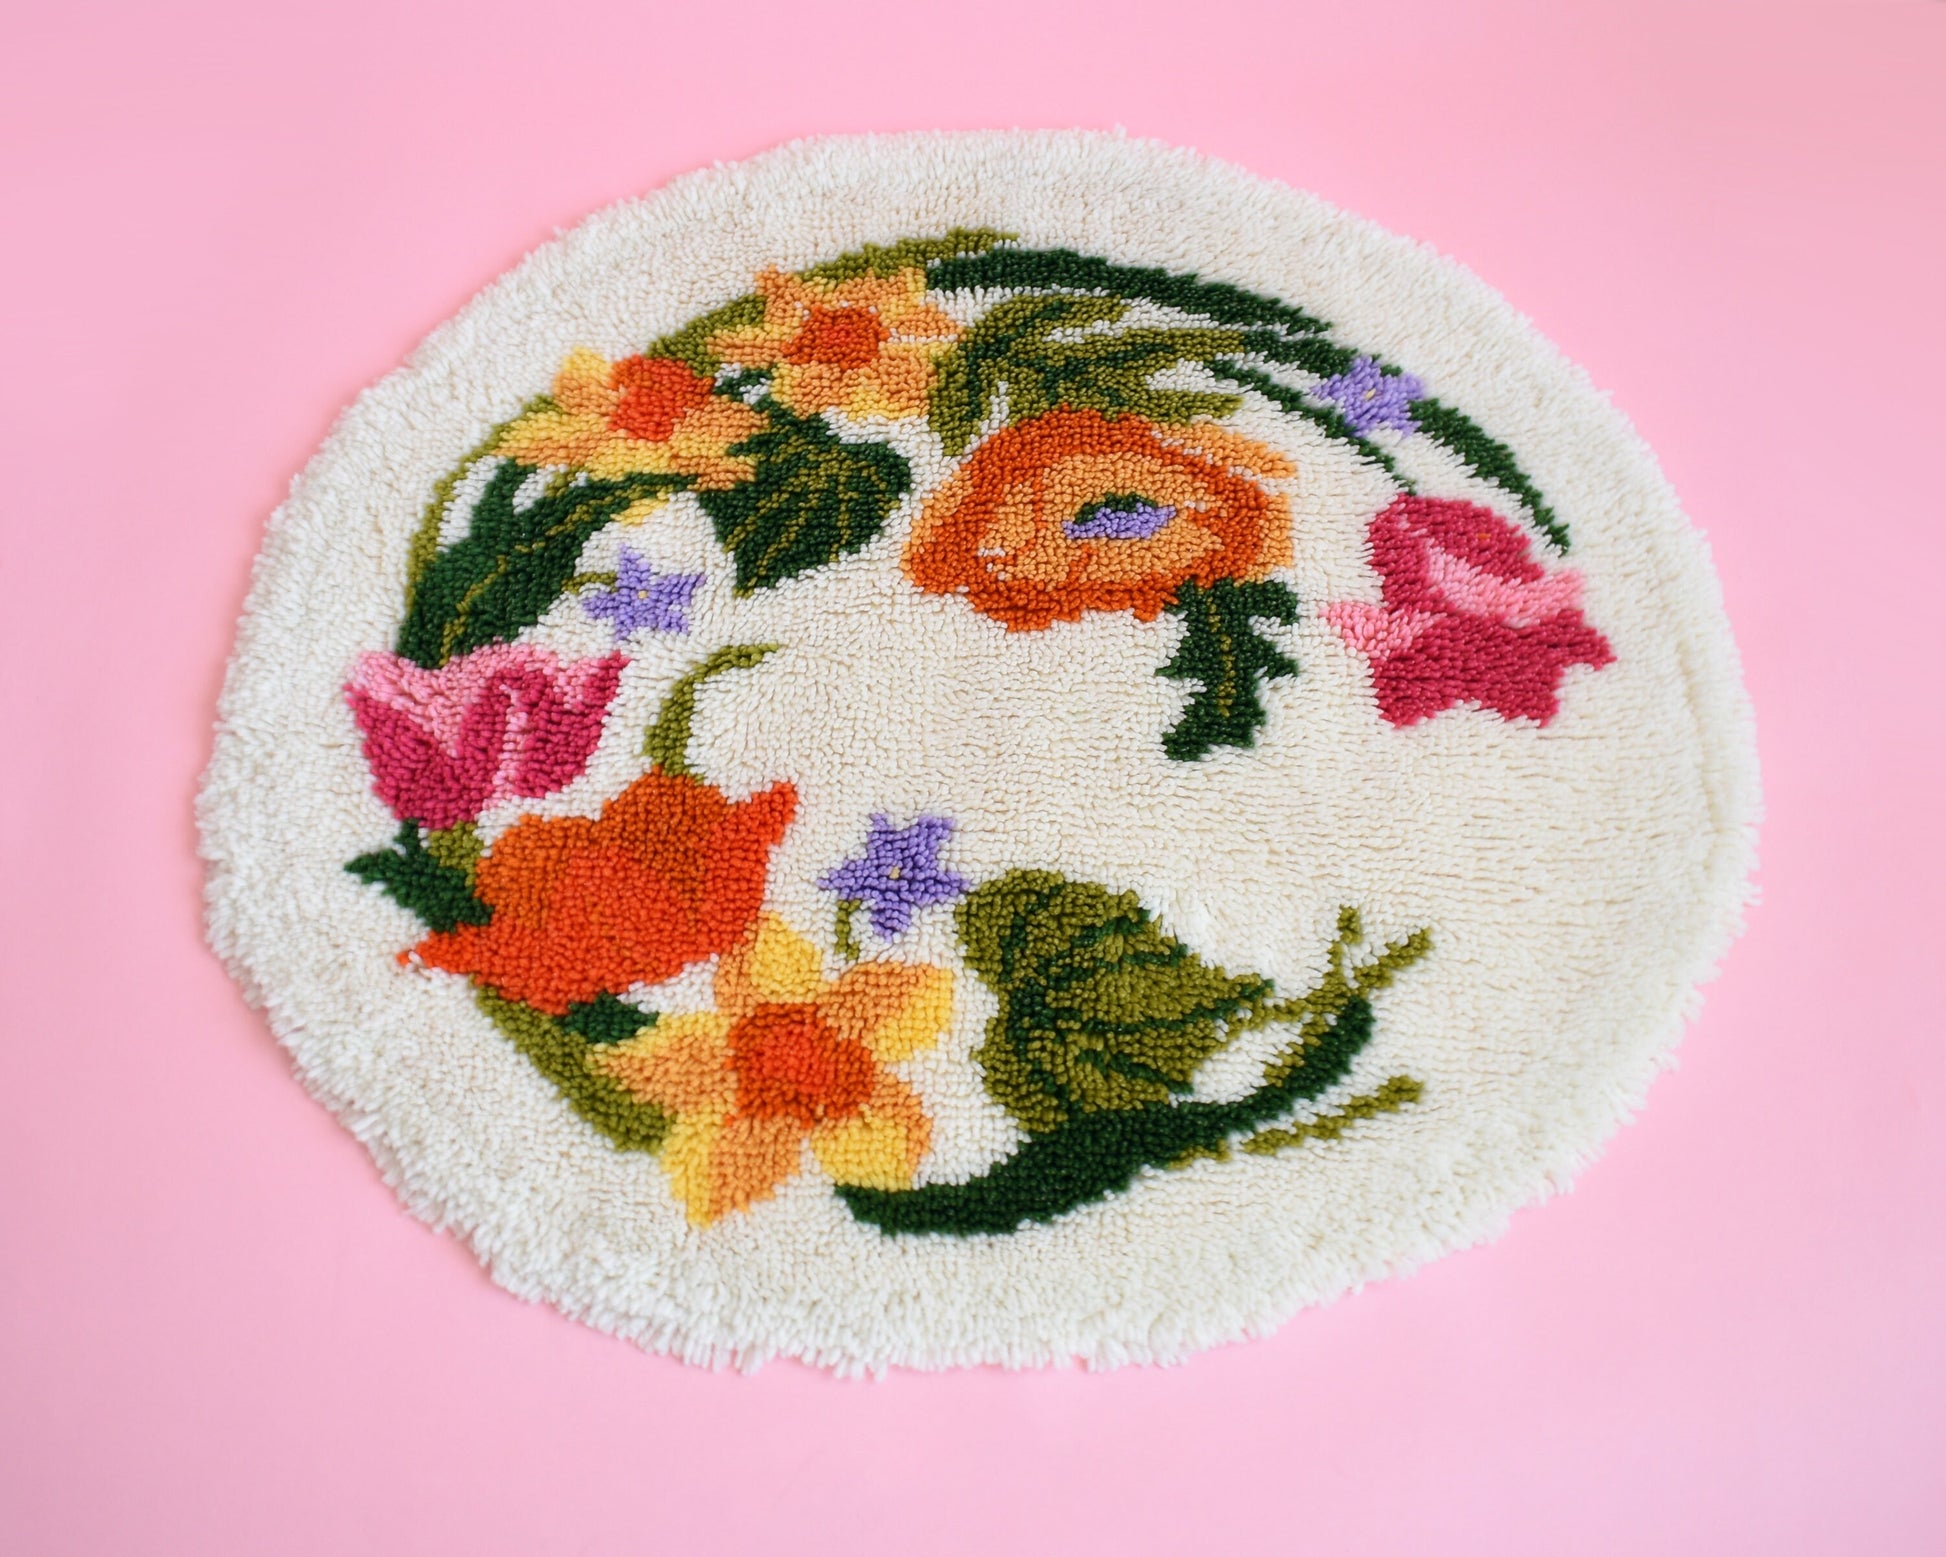 A vintage round floral latch hook rug that has cream white shaggy acrylic with a colorful floral motif in pinks, orange, yellow, purple and greens. The rug is on a pink background.